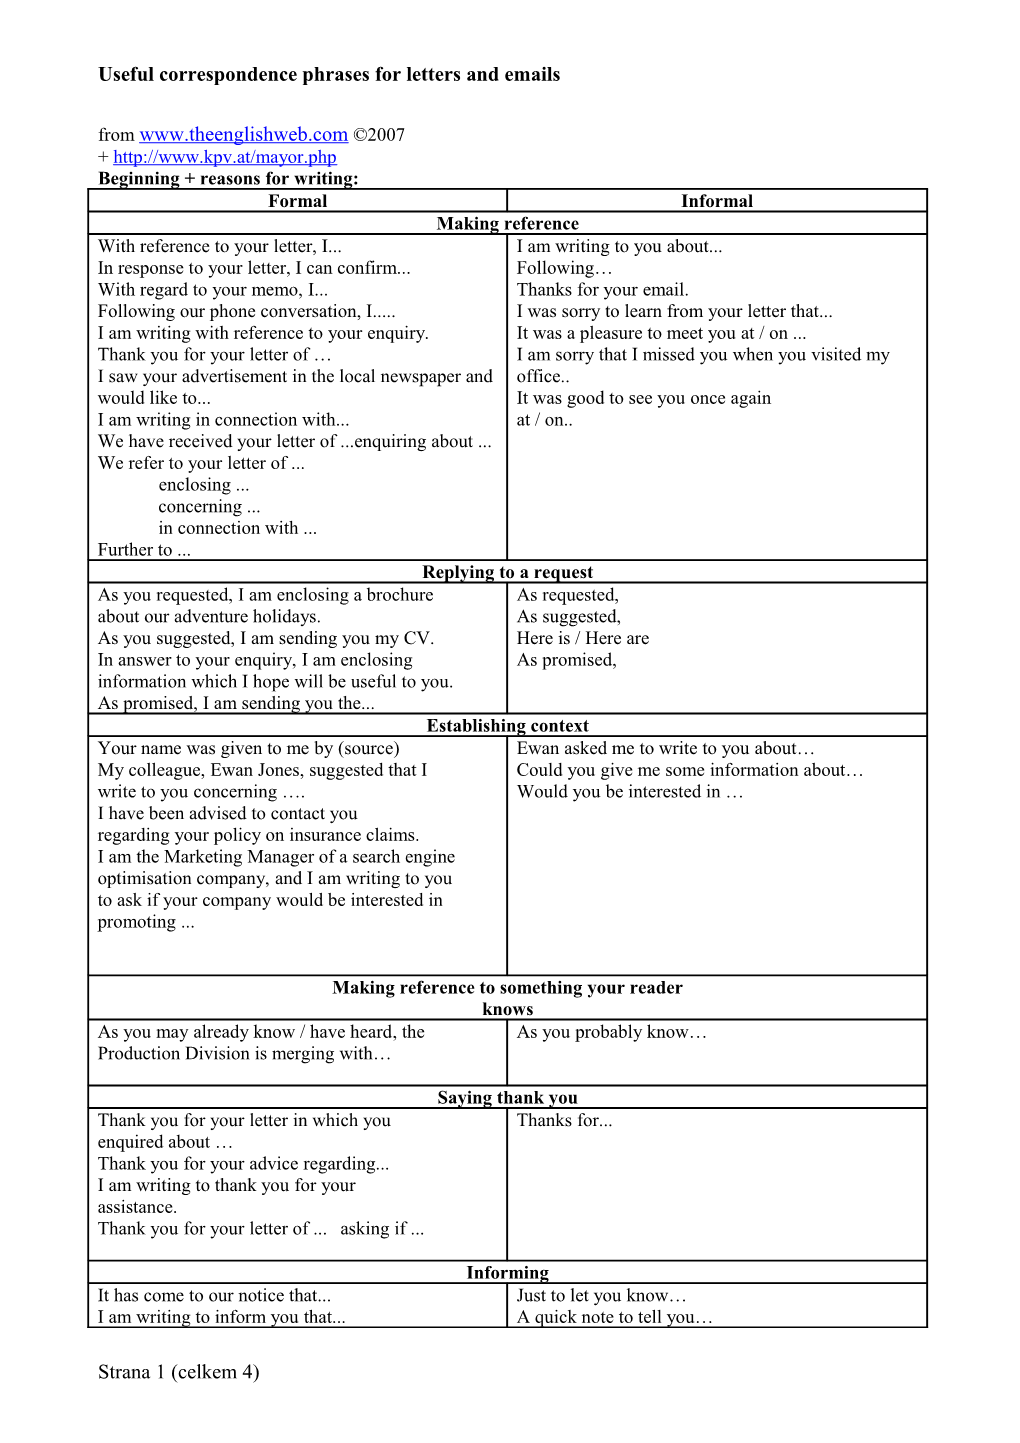 Useful Correspondence Phrases for Letters and Emails